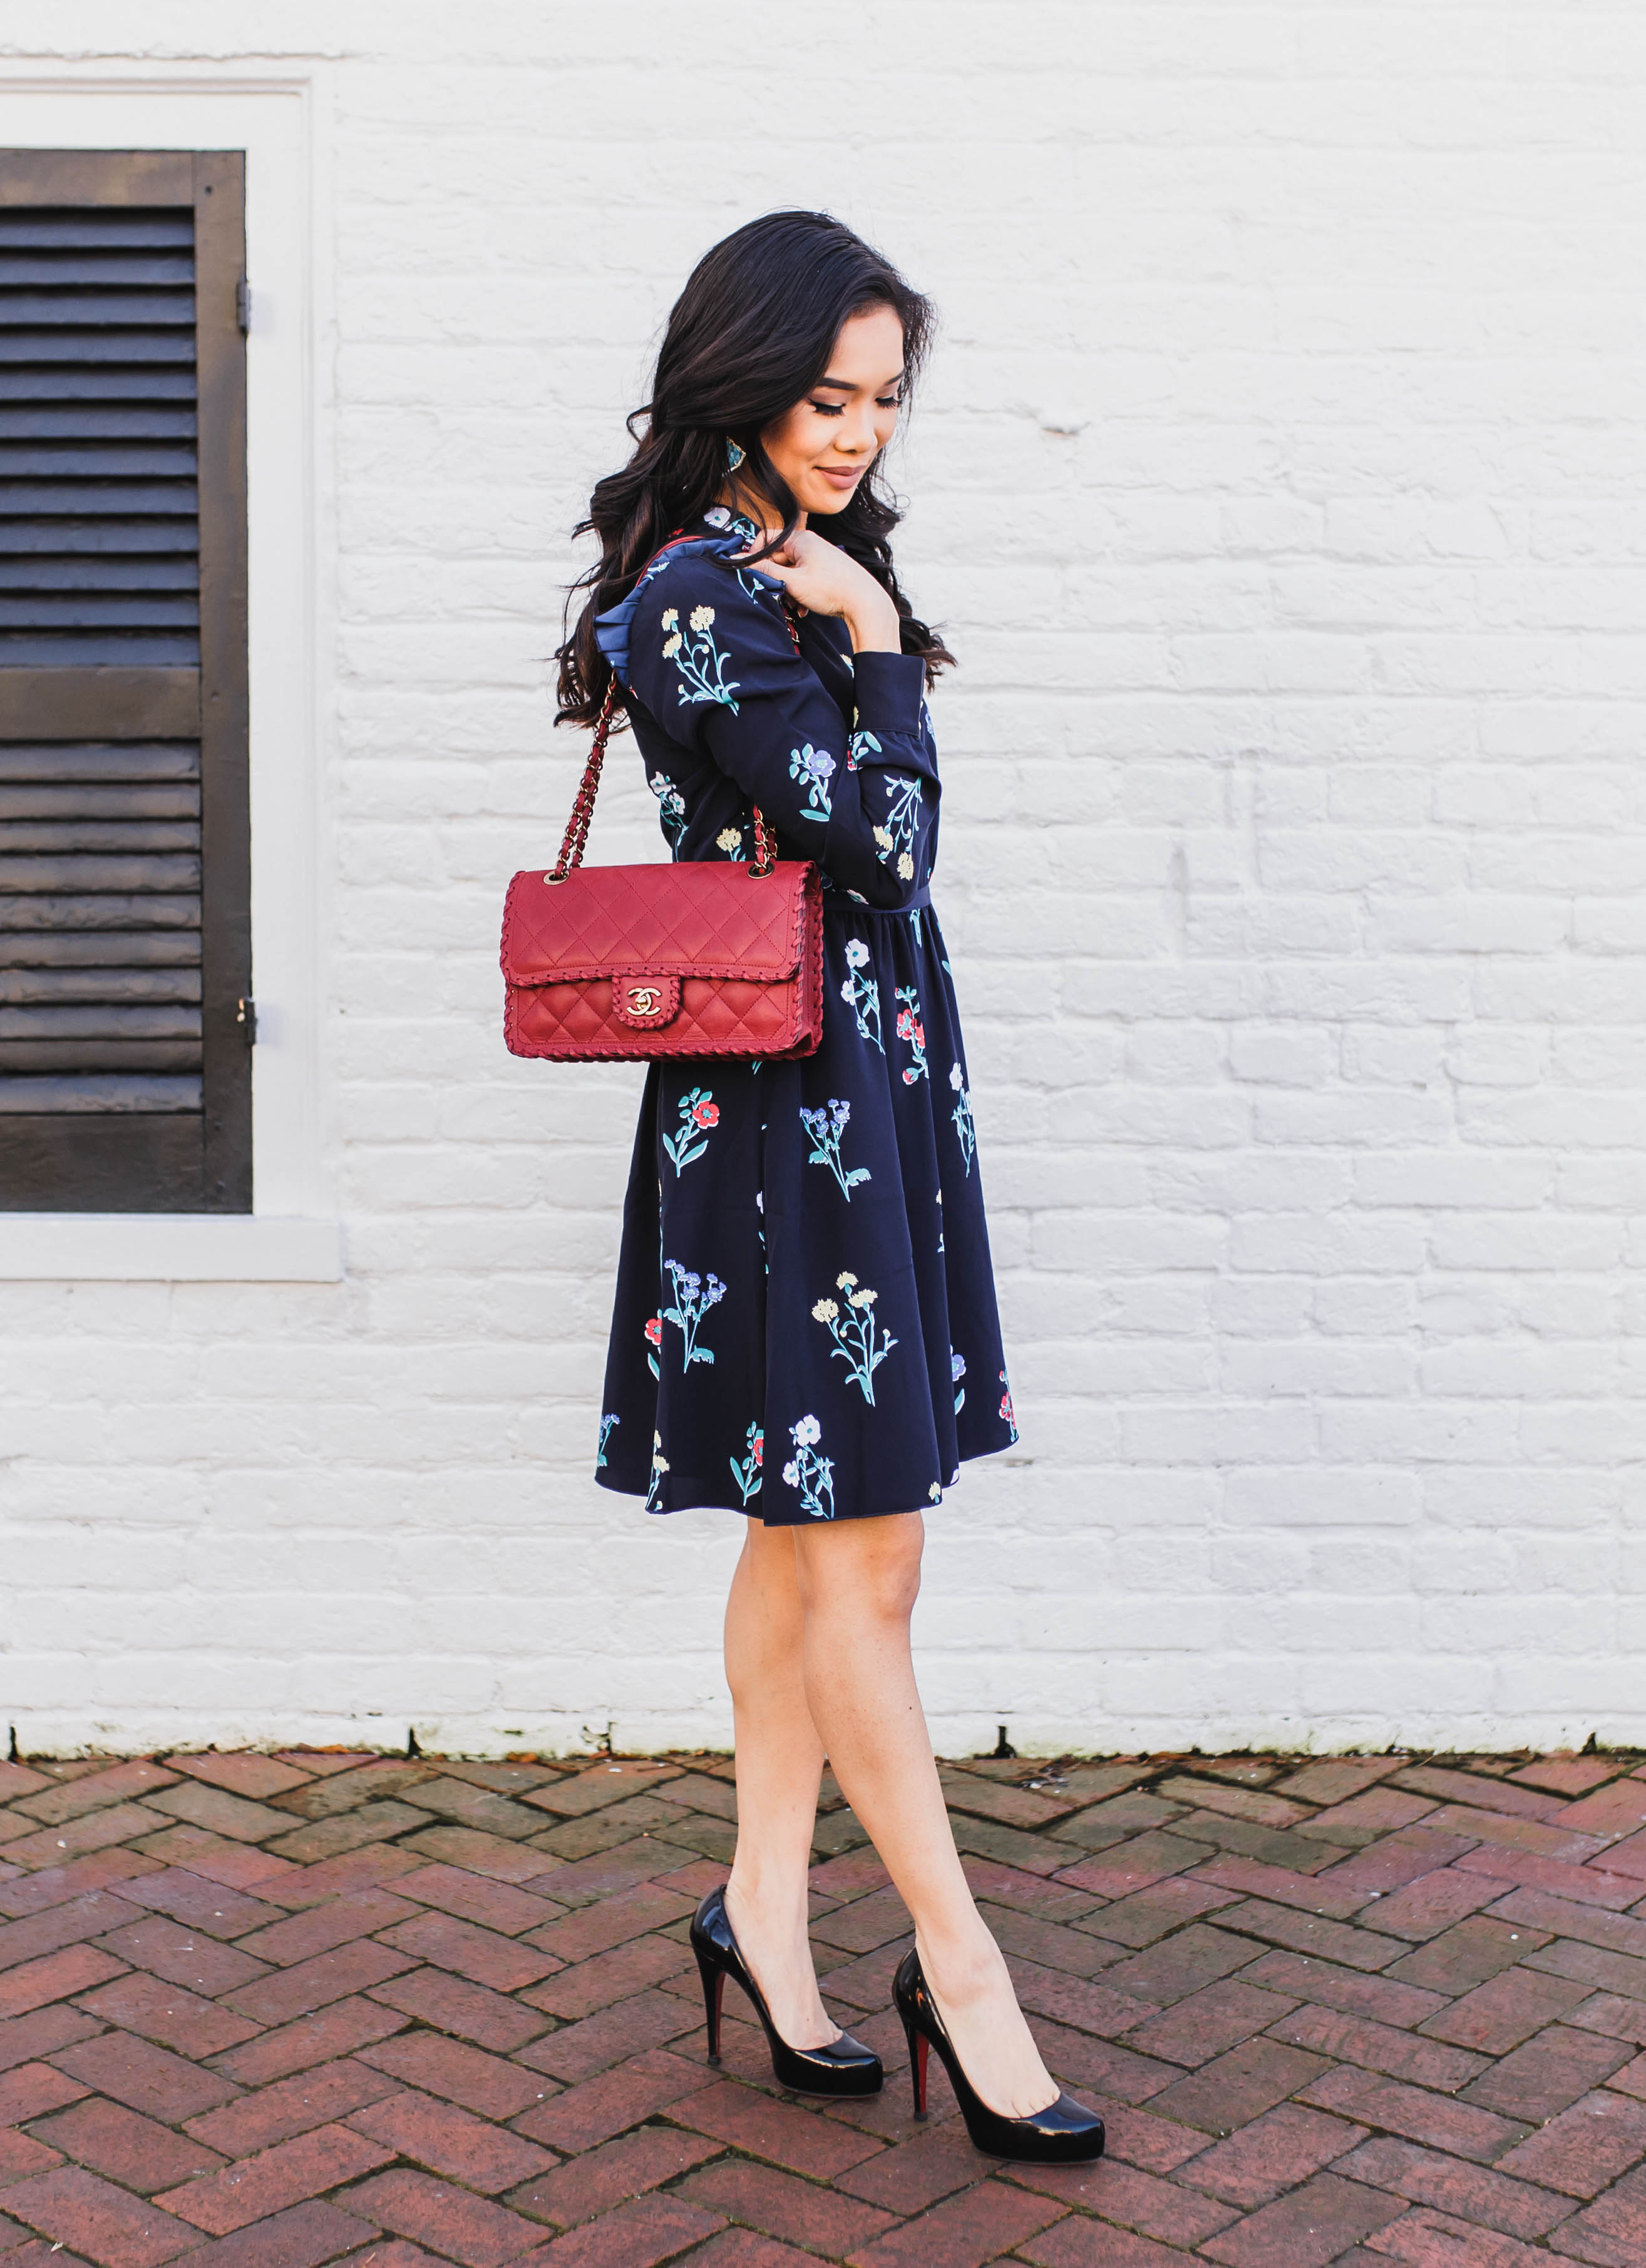 Friday Feels :: Tisdale Floral Dress for Early Spring - Color & Chic